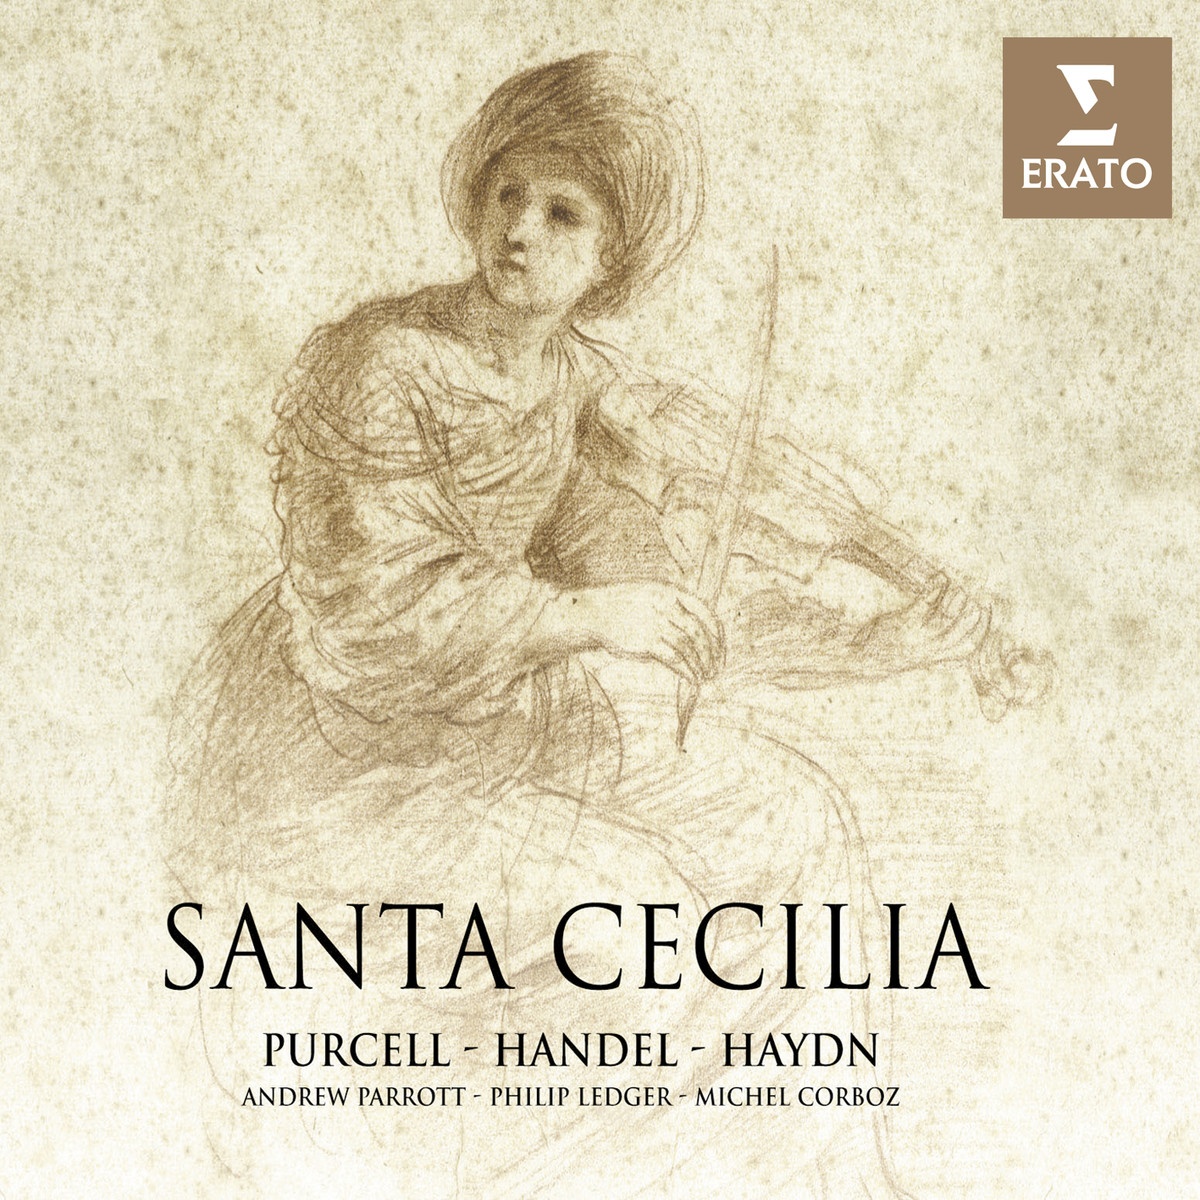 Ode on St Cecilia's Day 1692 (Hail!  Bright Cecilia) Z328: In vain the am'rous flute